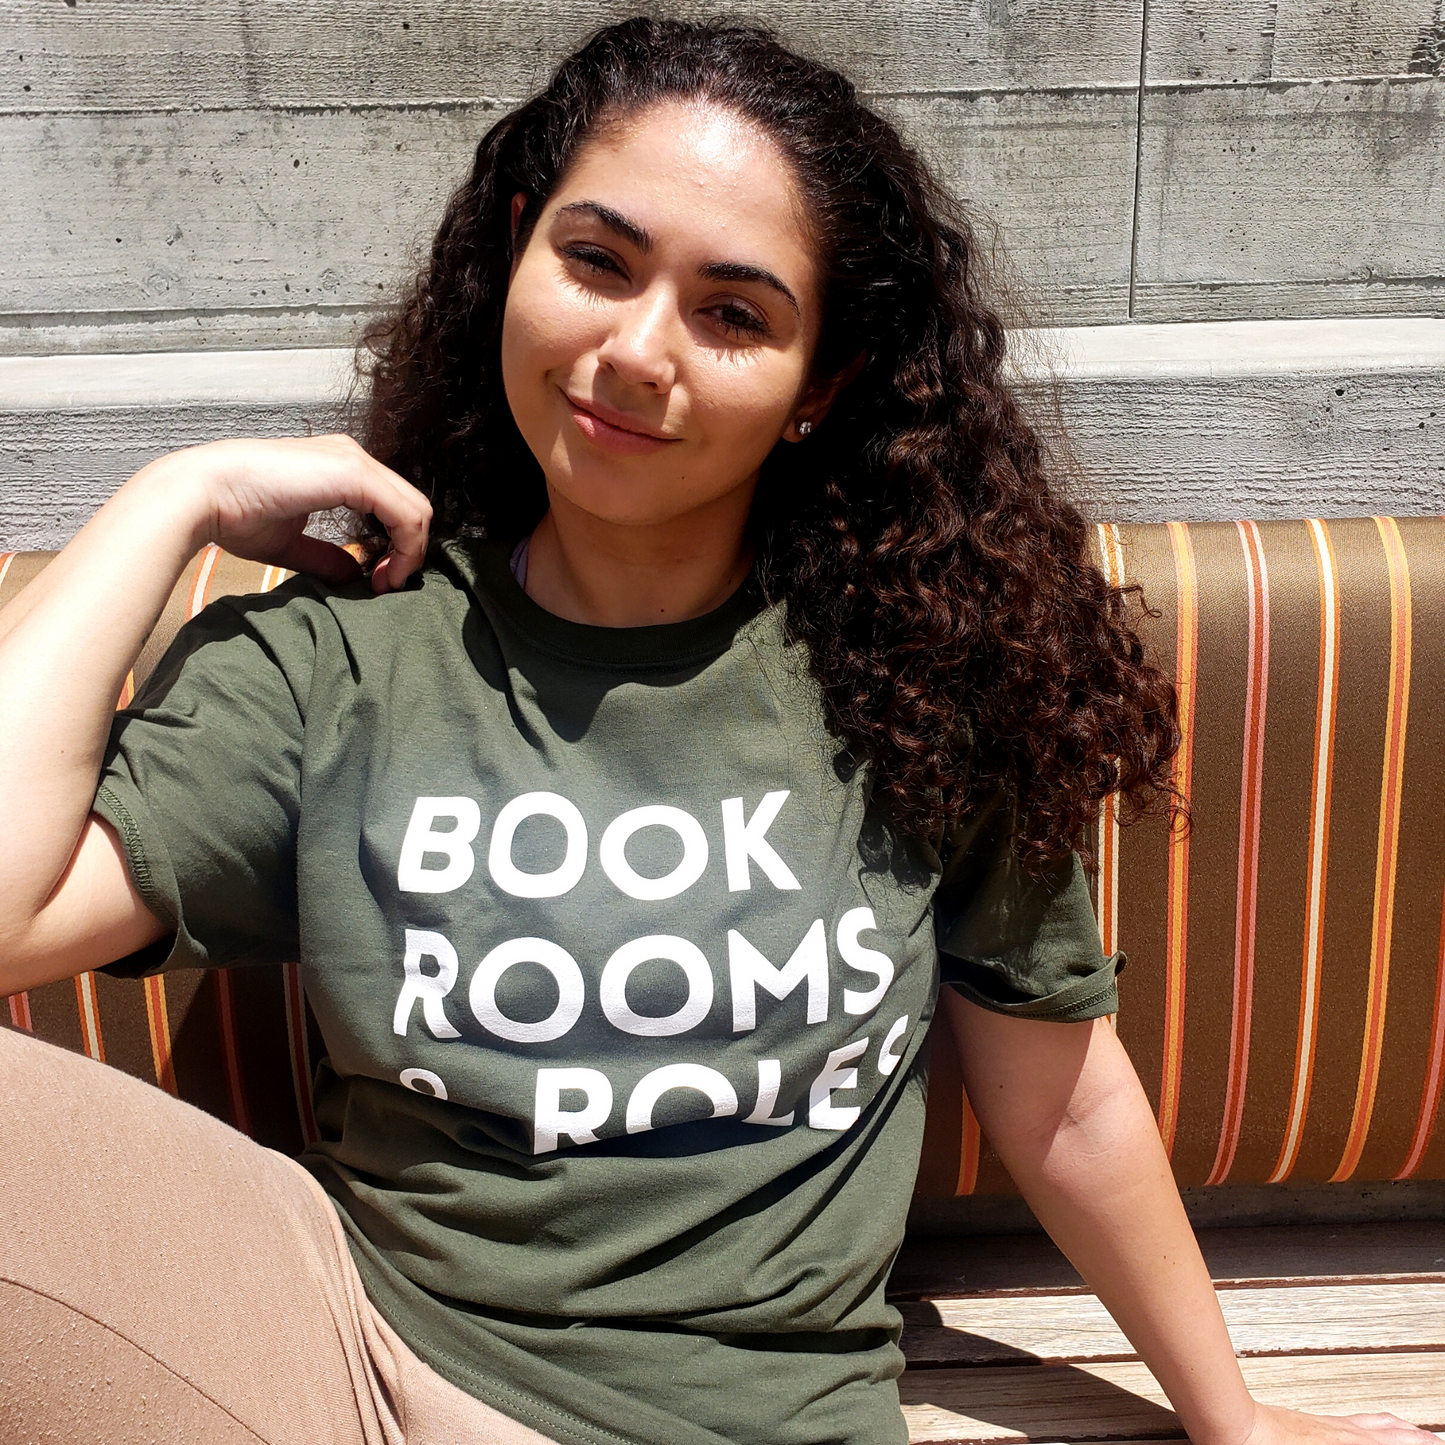 Books Rooms + Roles - Olive Green Unisex T-Shirt